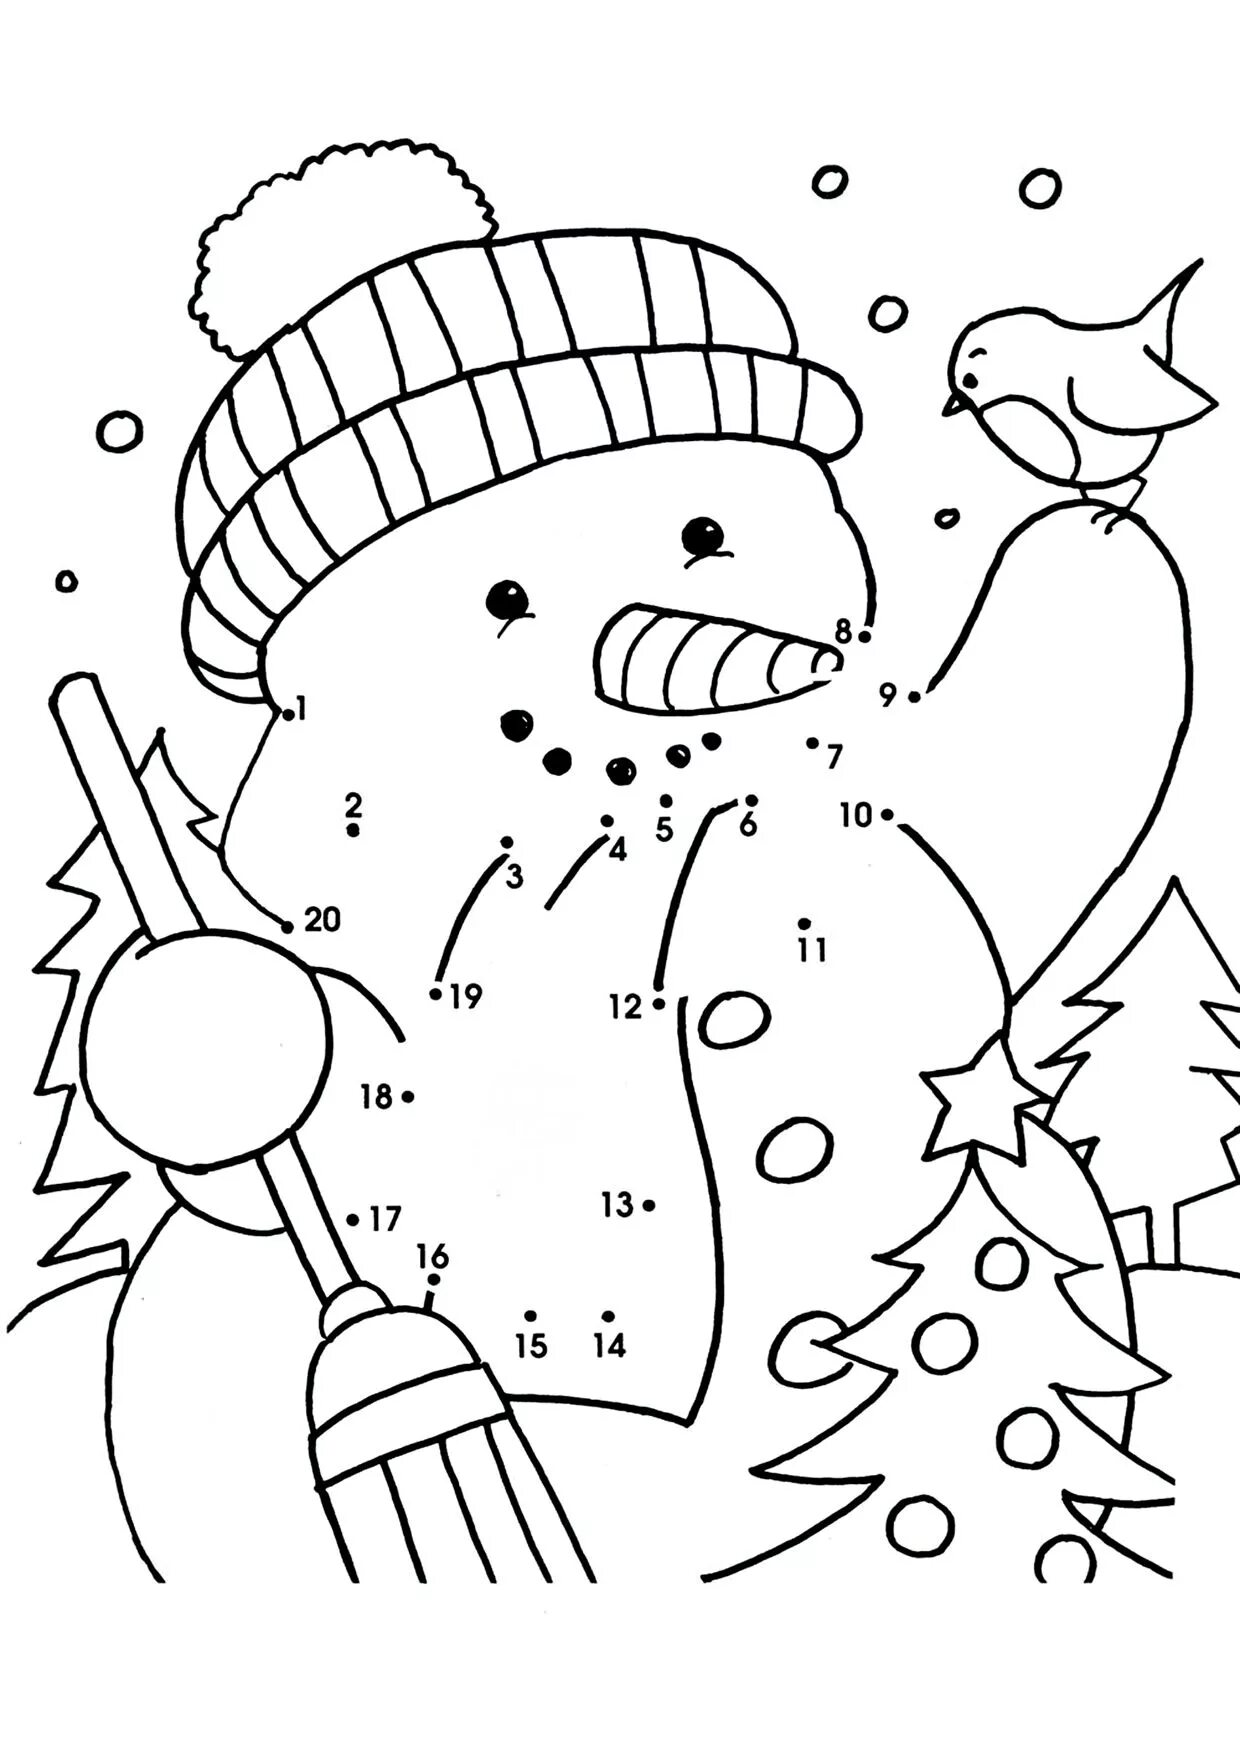 Fairy snowman coloring page with polka dots